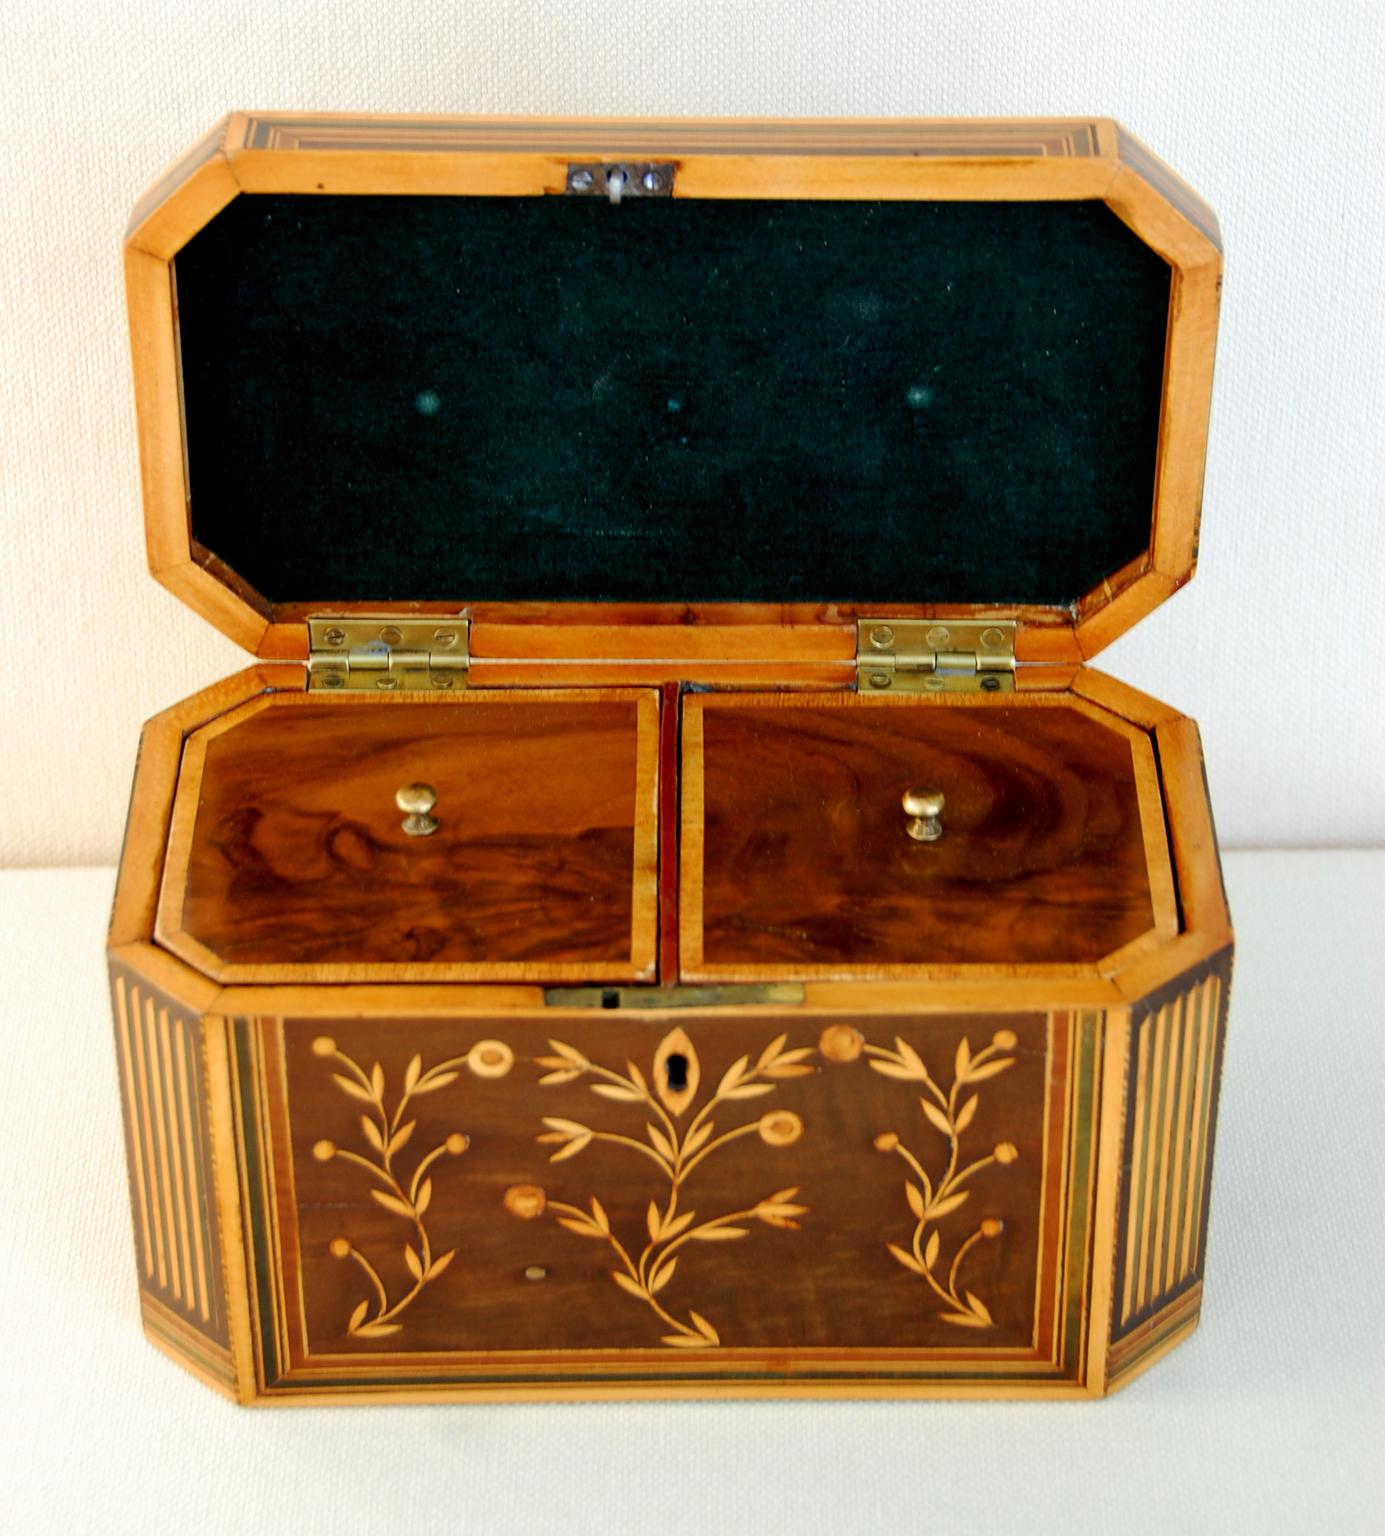 English Georgian double teacaddy of octagonal cut corner shape. Laburnum oval inlaid panels to top, sides and back; leaf and berry inlay in boxwood to top and front; extensive inlaid borders in stained boxwood, mahogany and ebony. Stained boxwood